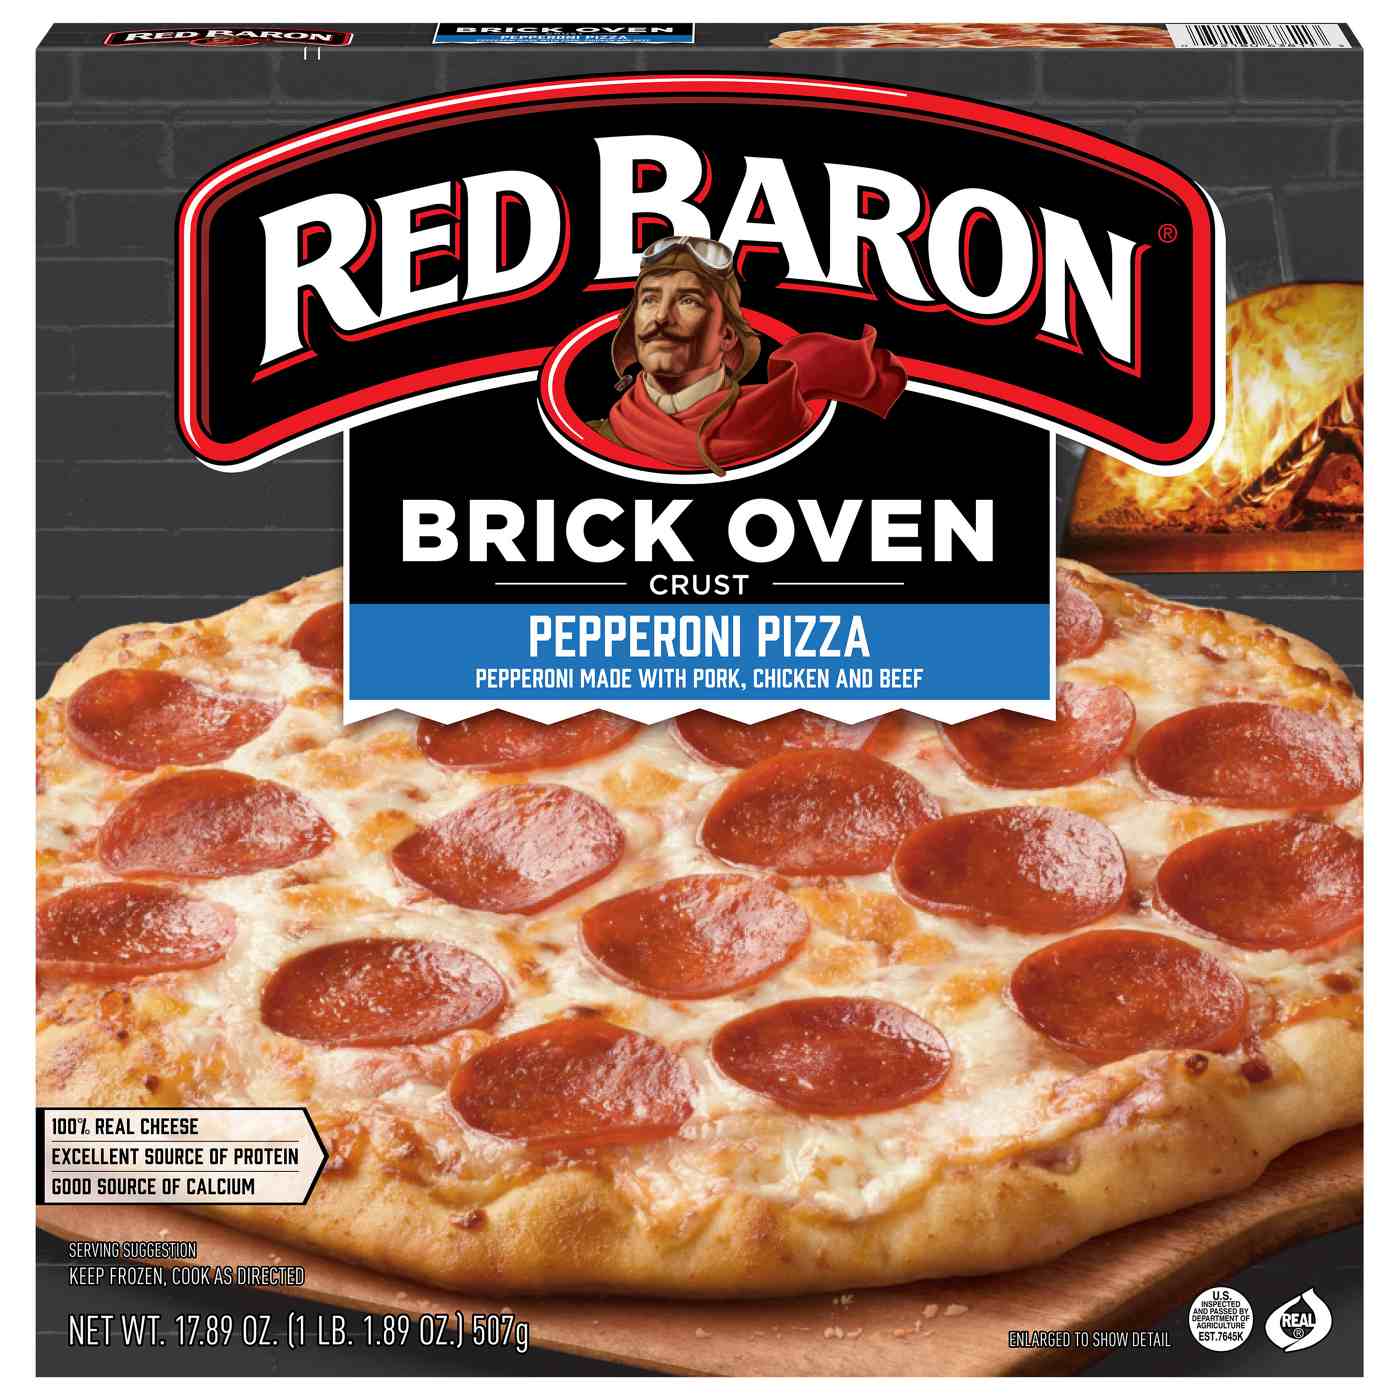 Red Baron Brick Oven Crust Frozen Pizza - Pepperoni; image 1 of 2